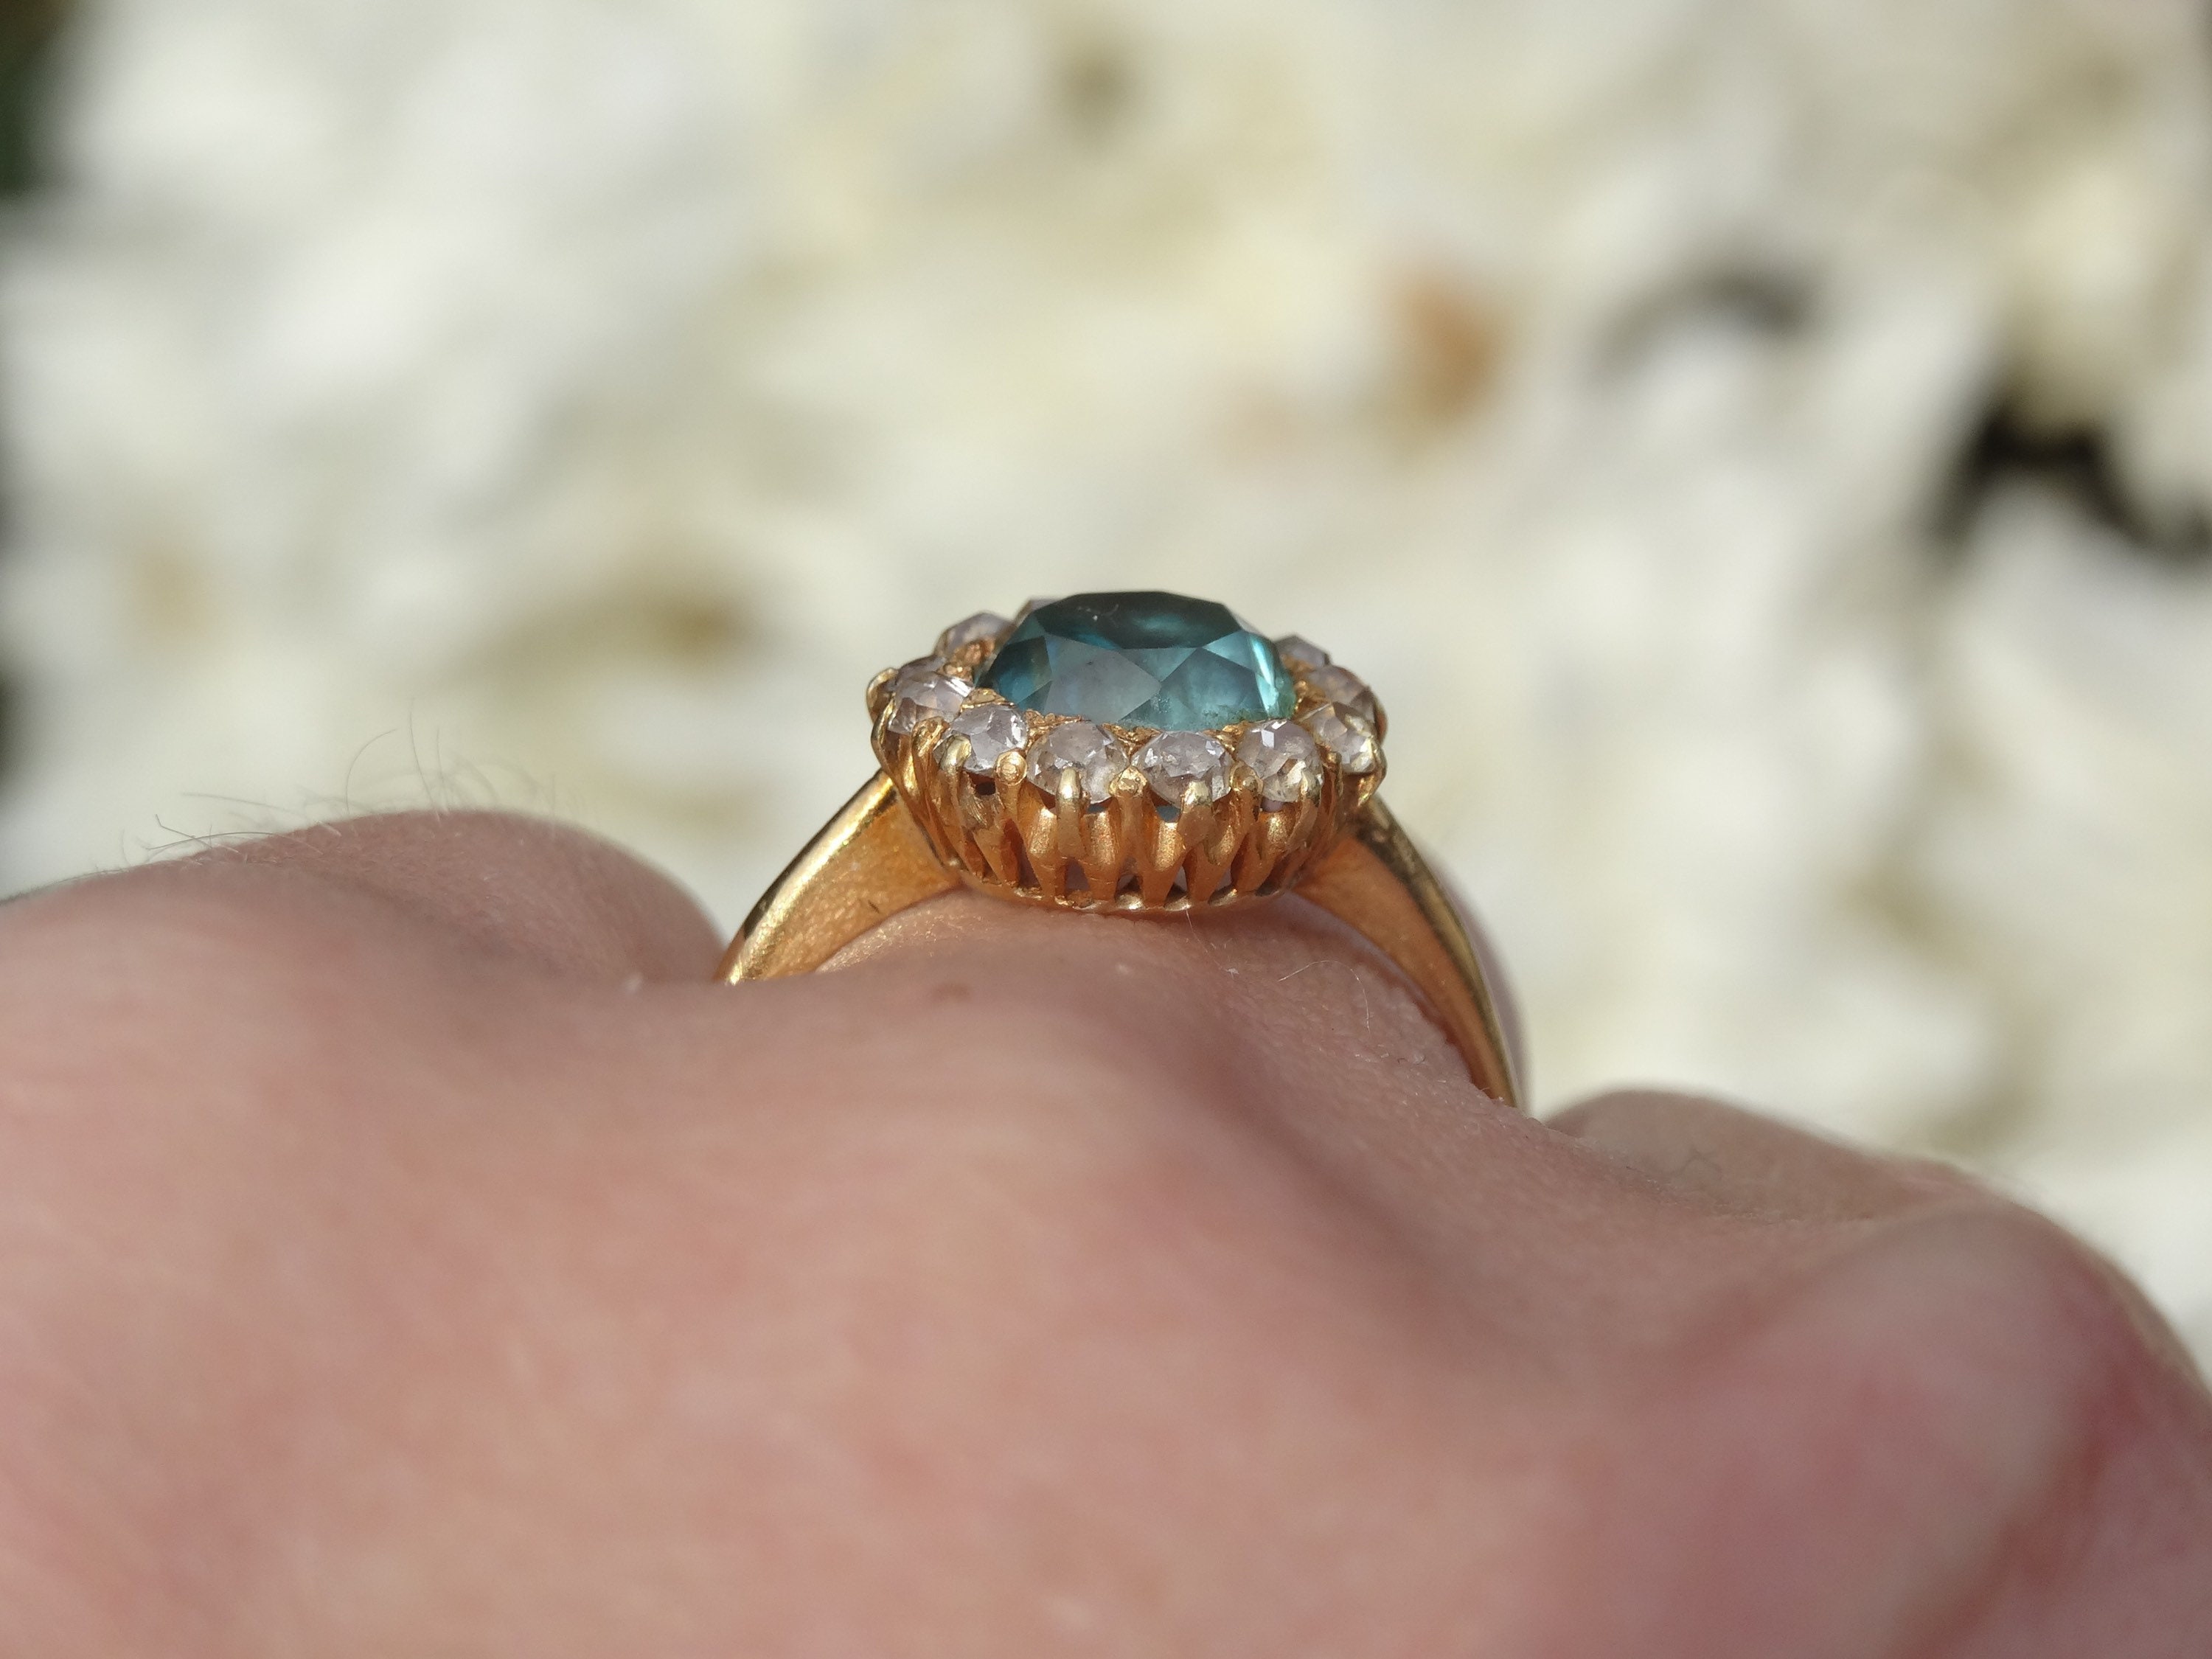 Antique, Estate & Consignment 18 Karat Yellow Gold and Blue Zircon Ring  200-1474 - Hurdle's Jewelry